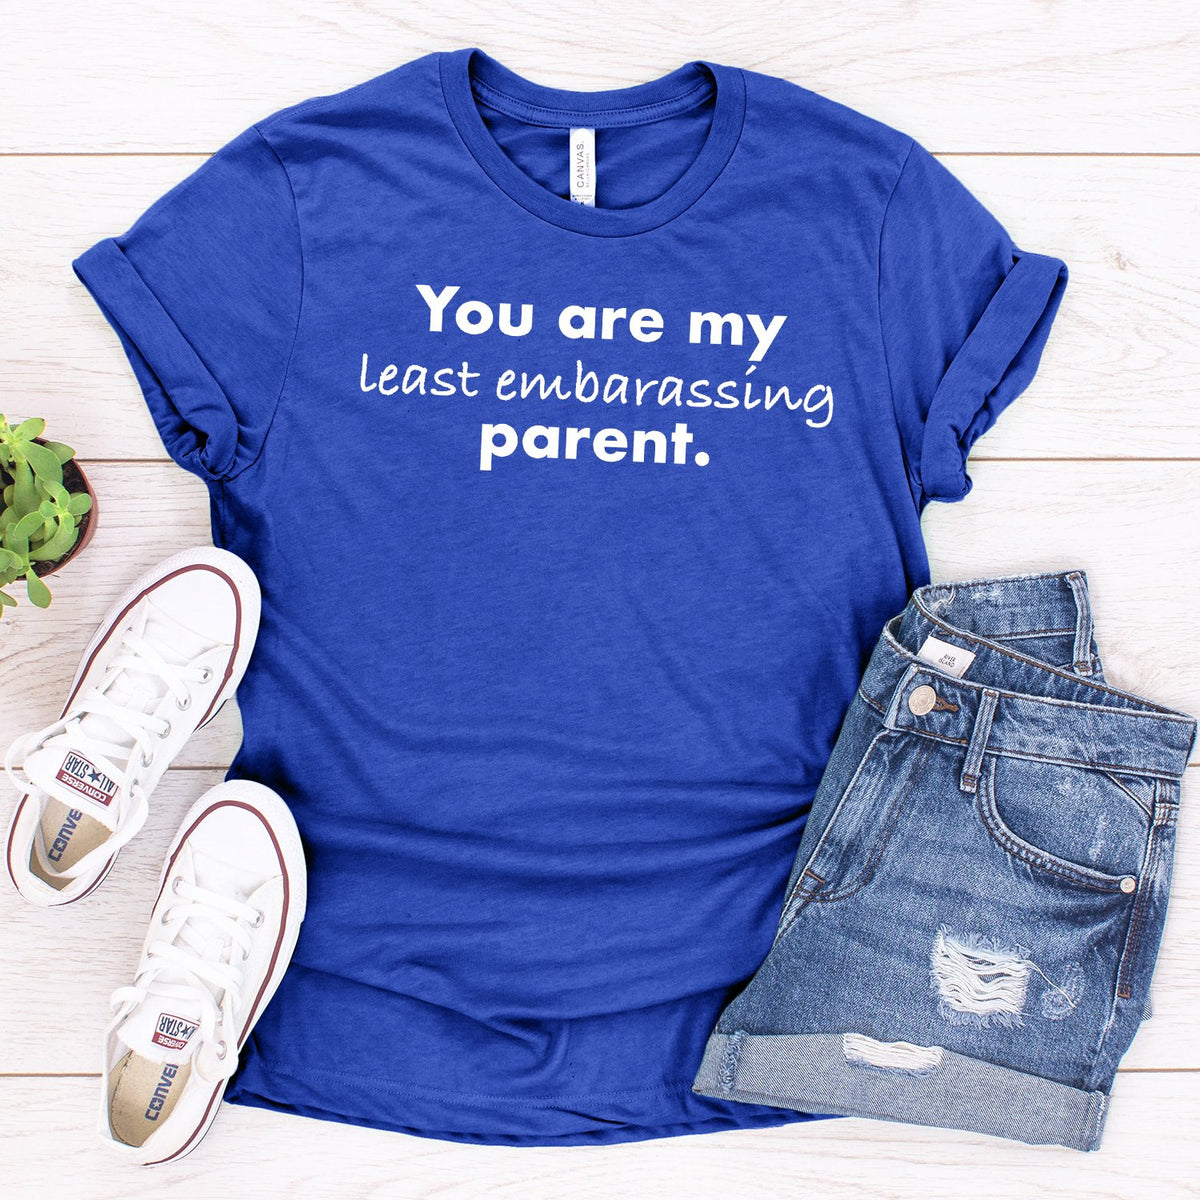 You Are My Least Embarassing Parent - Short Sleeve Tee Shirt